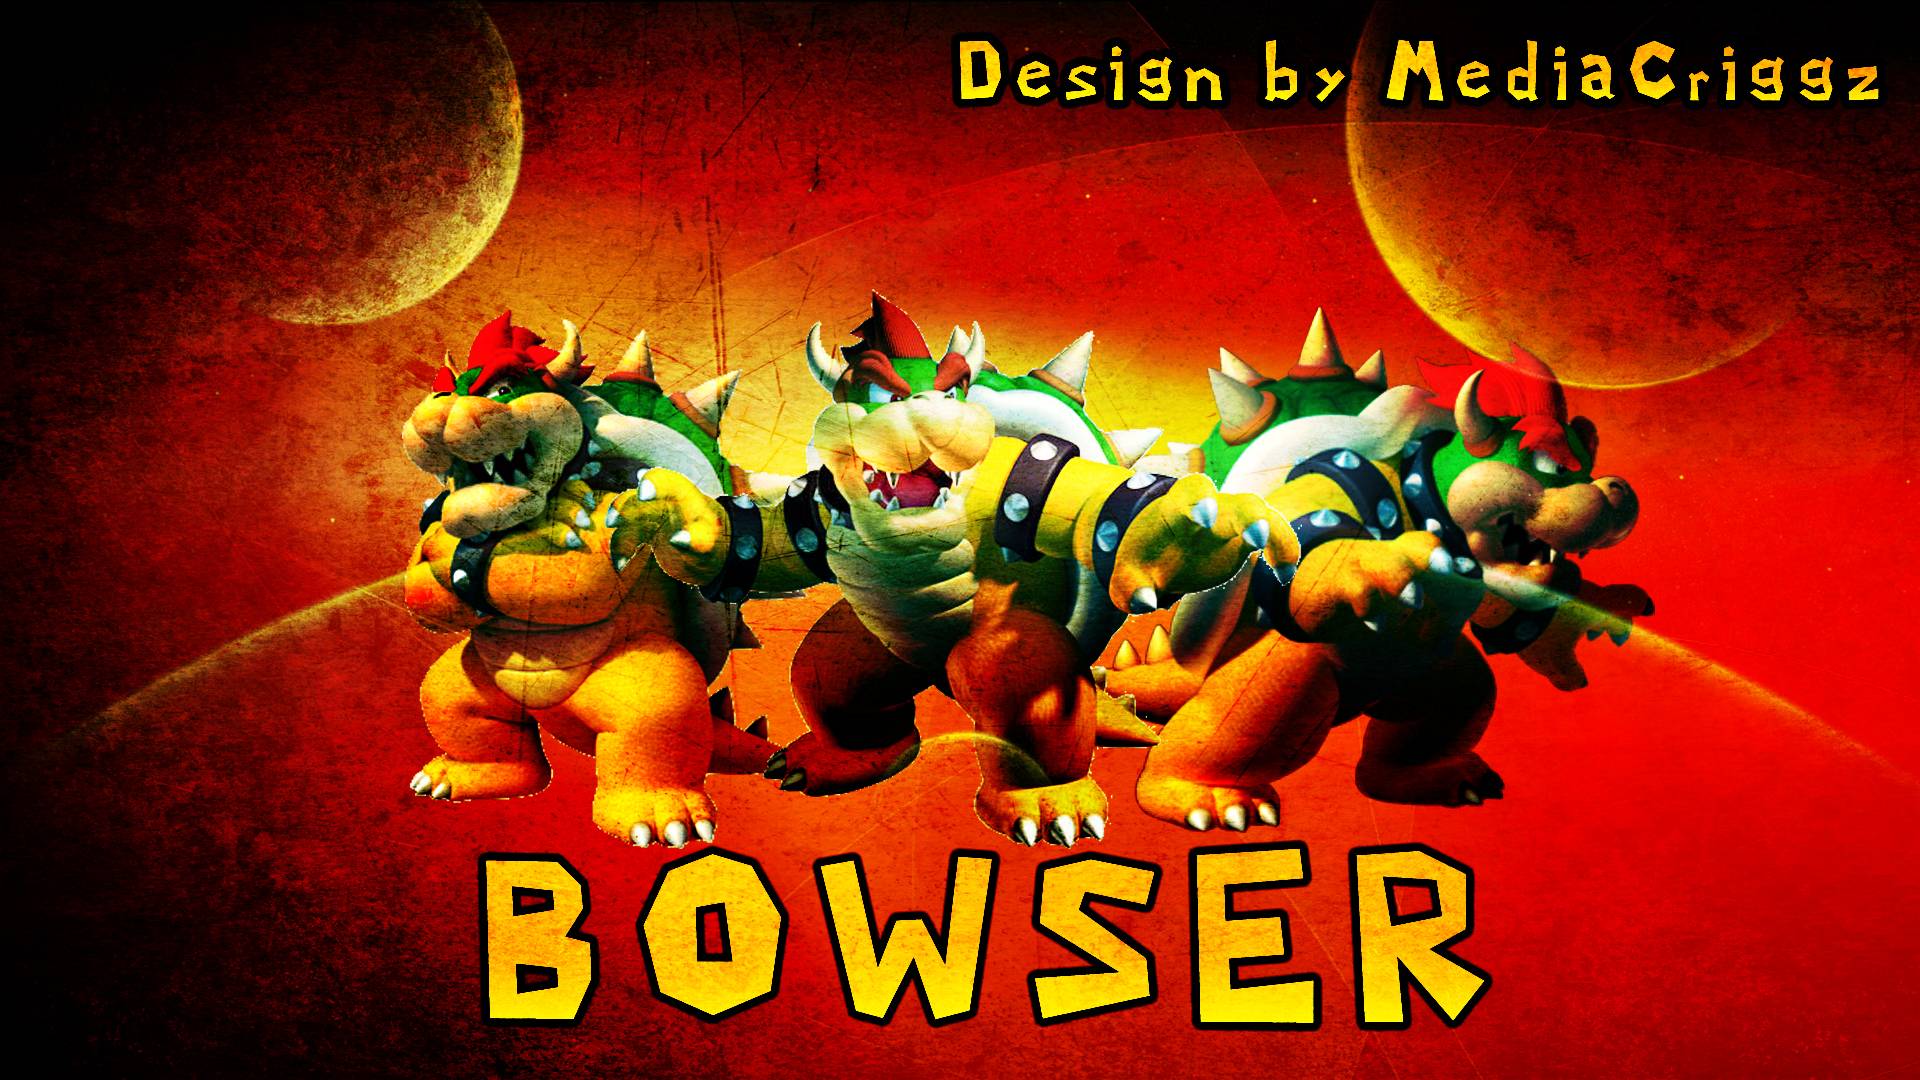 Bowser Wallpapers by MediaCriggz